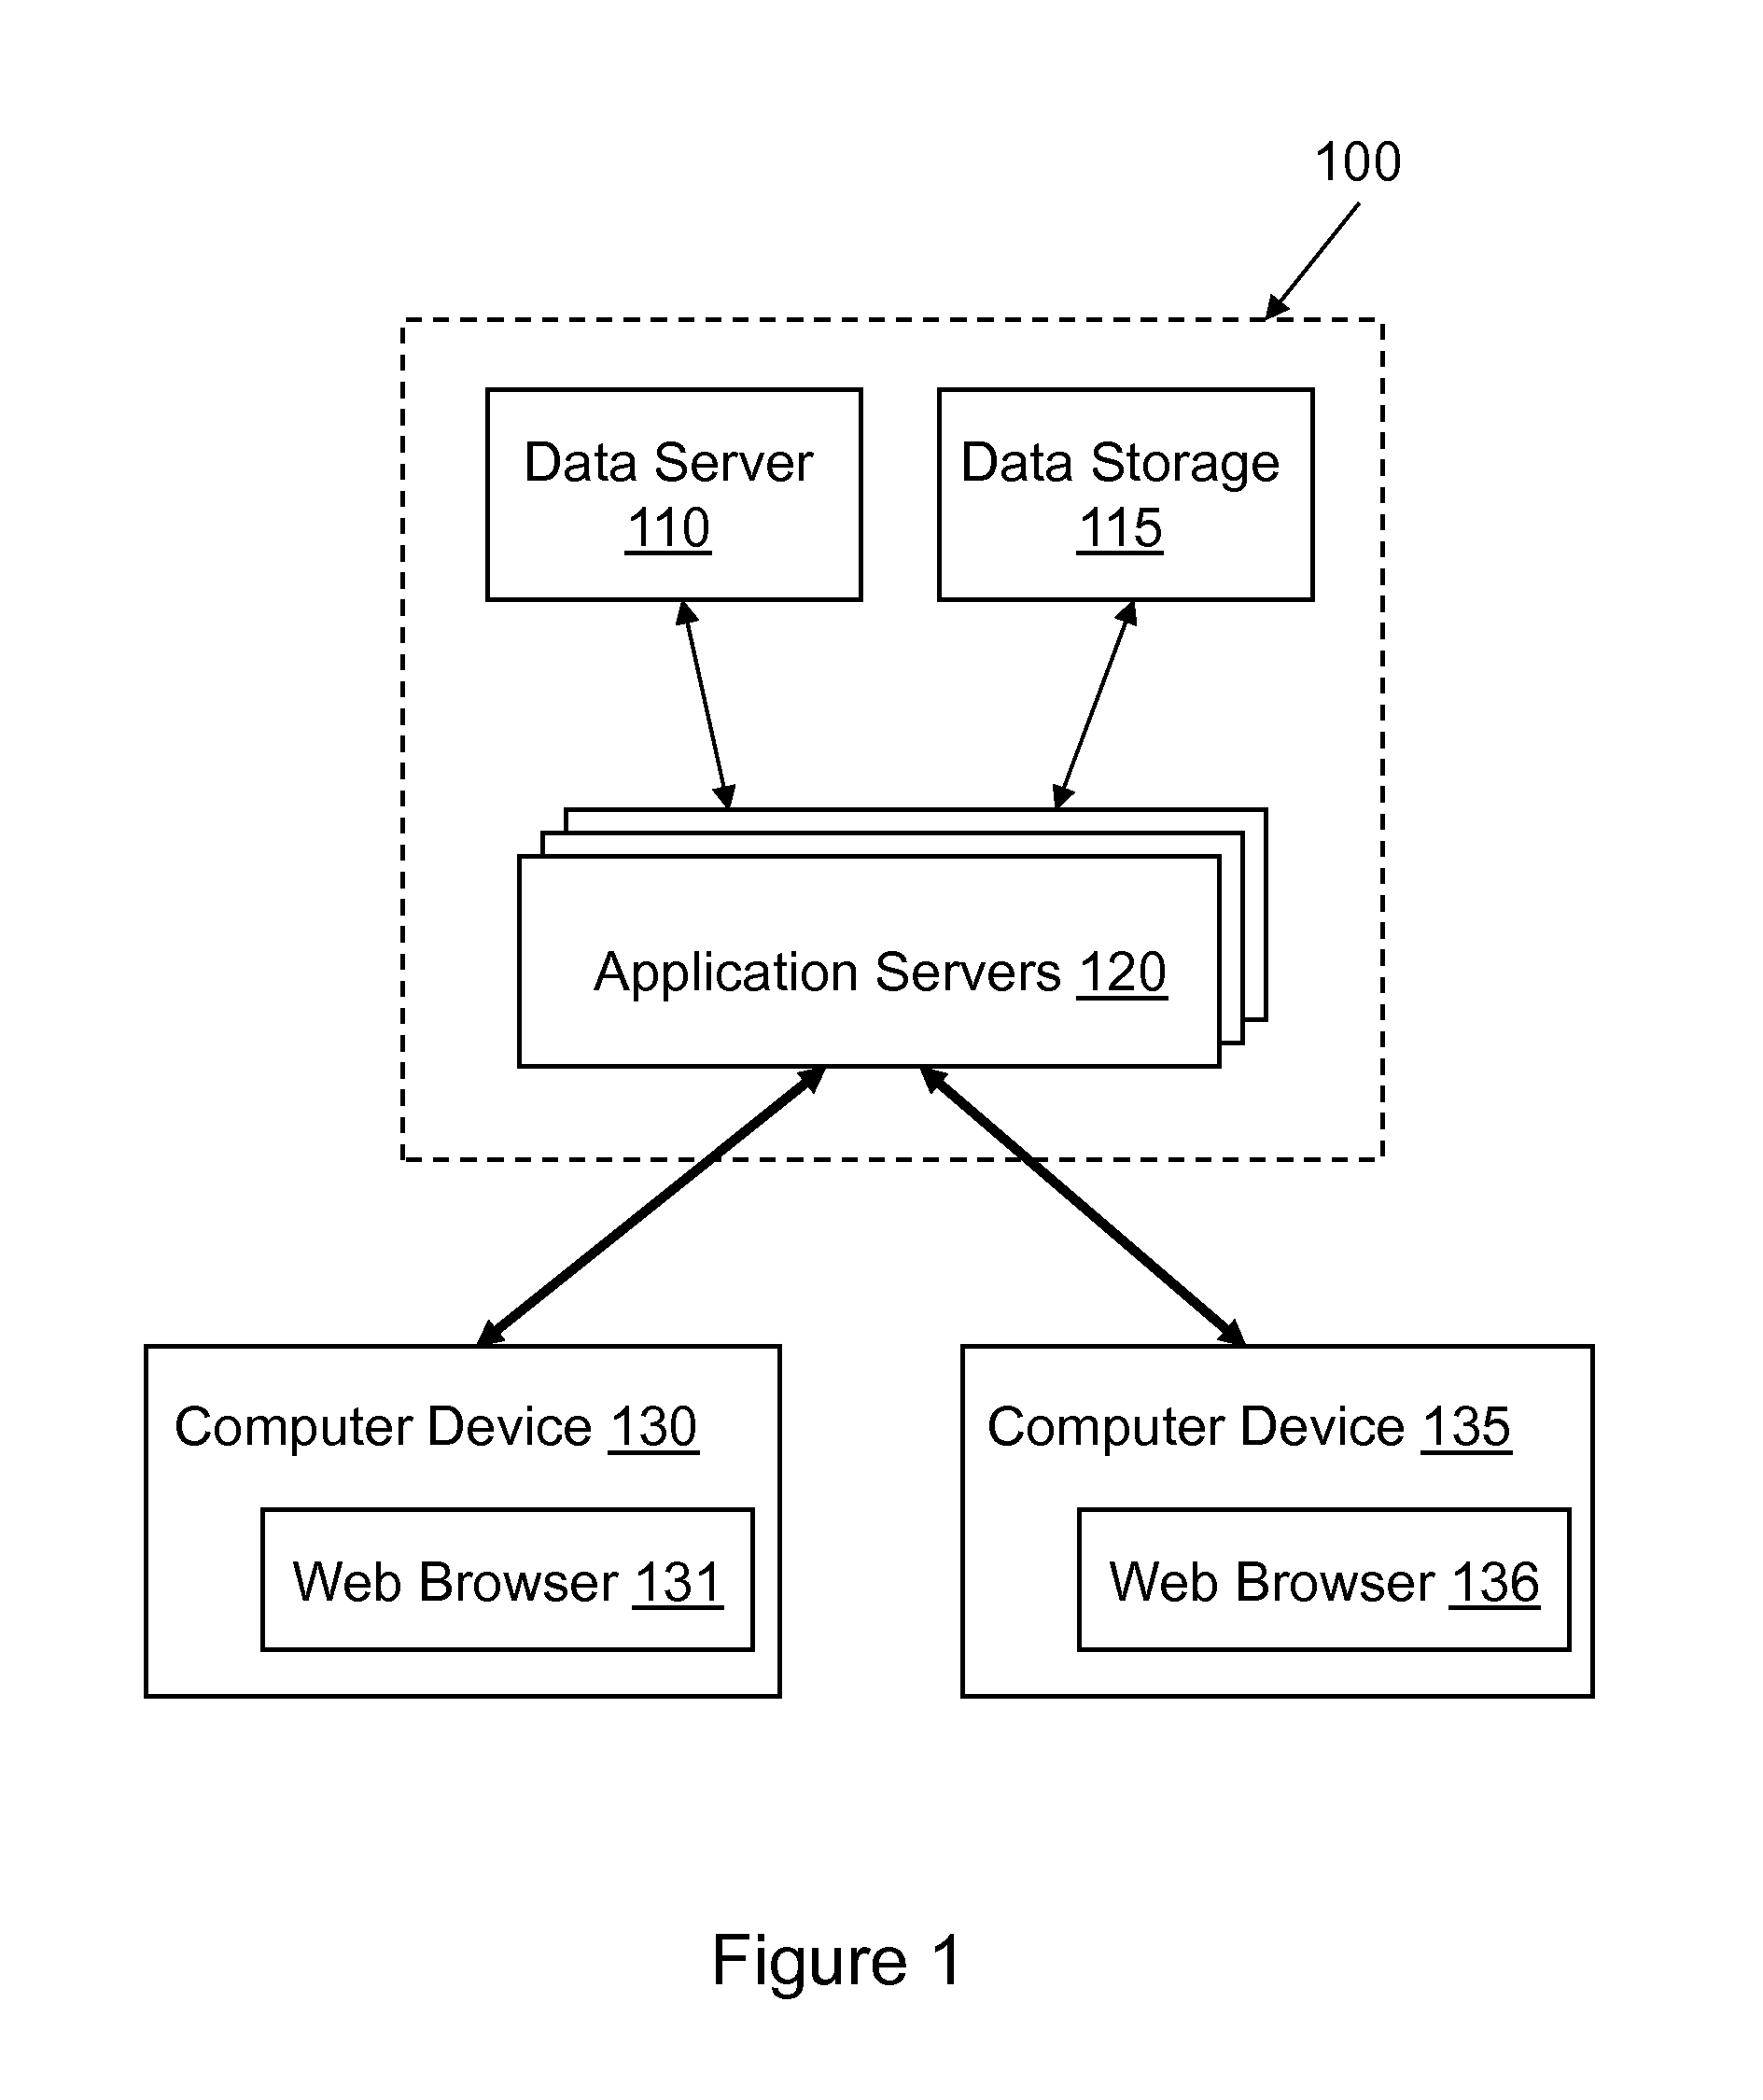 Systems and methods for webpage creation and updating